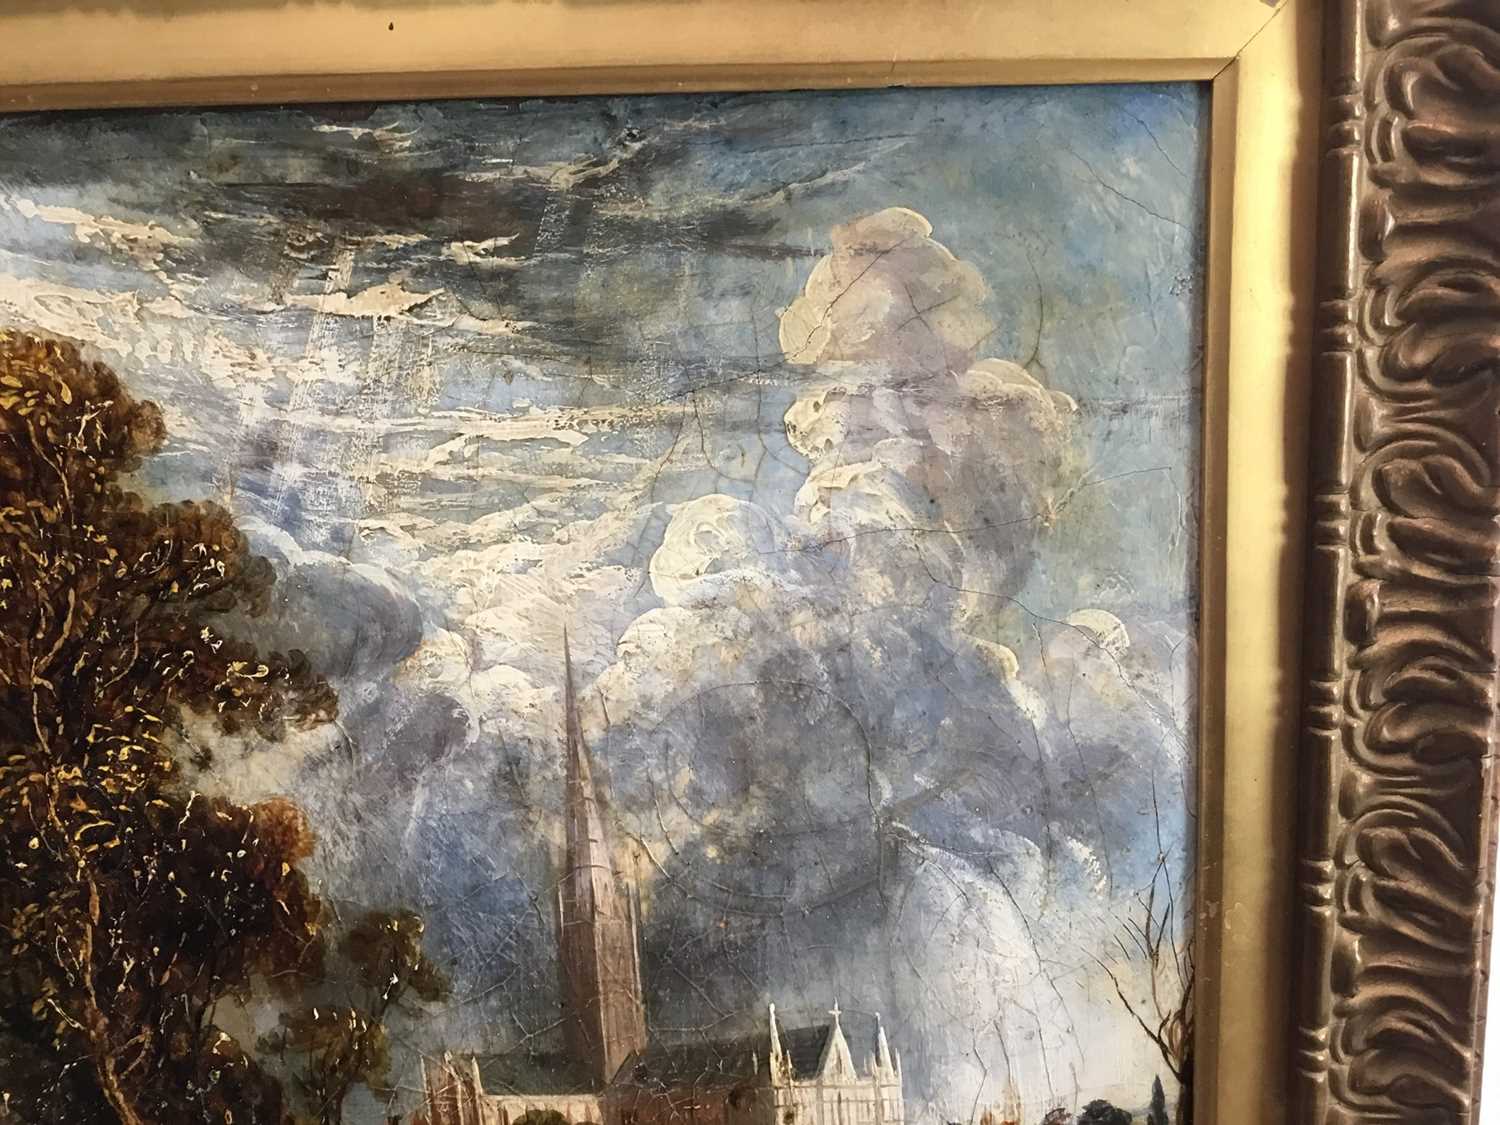 Joseph Paul oil on canvas, Salisbury Cathedral after John Constable - Image 5 of 9